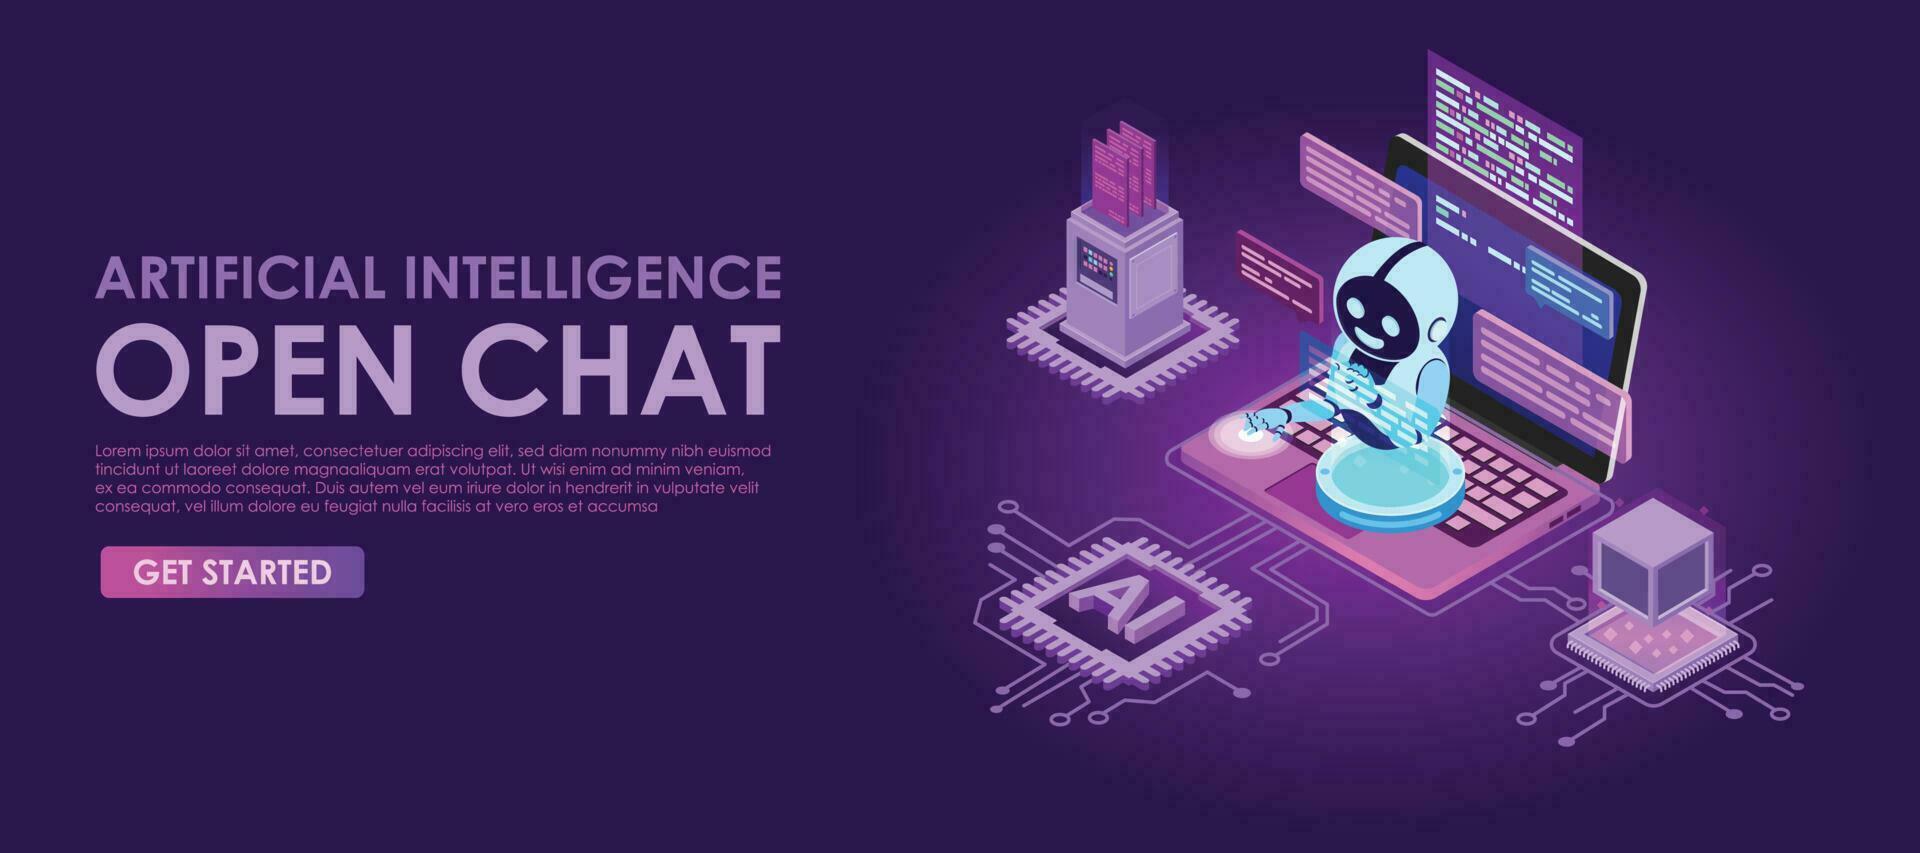 artificial intelligence openchat vector